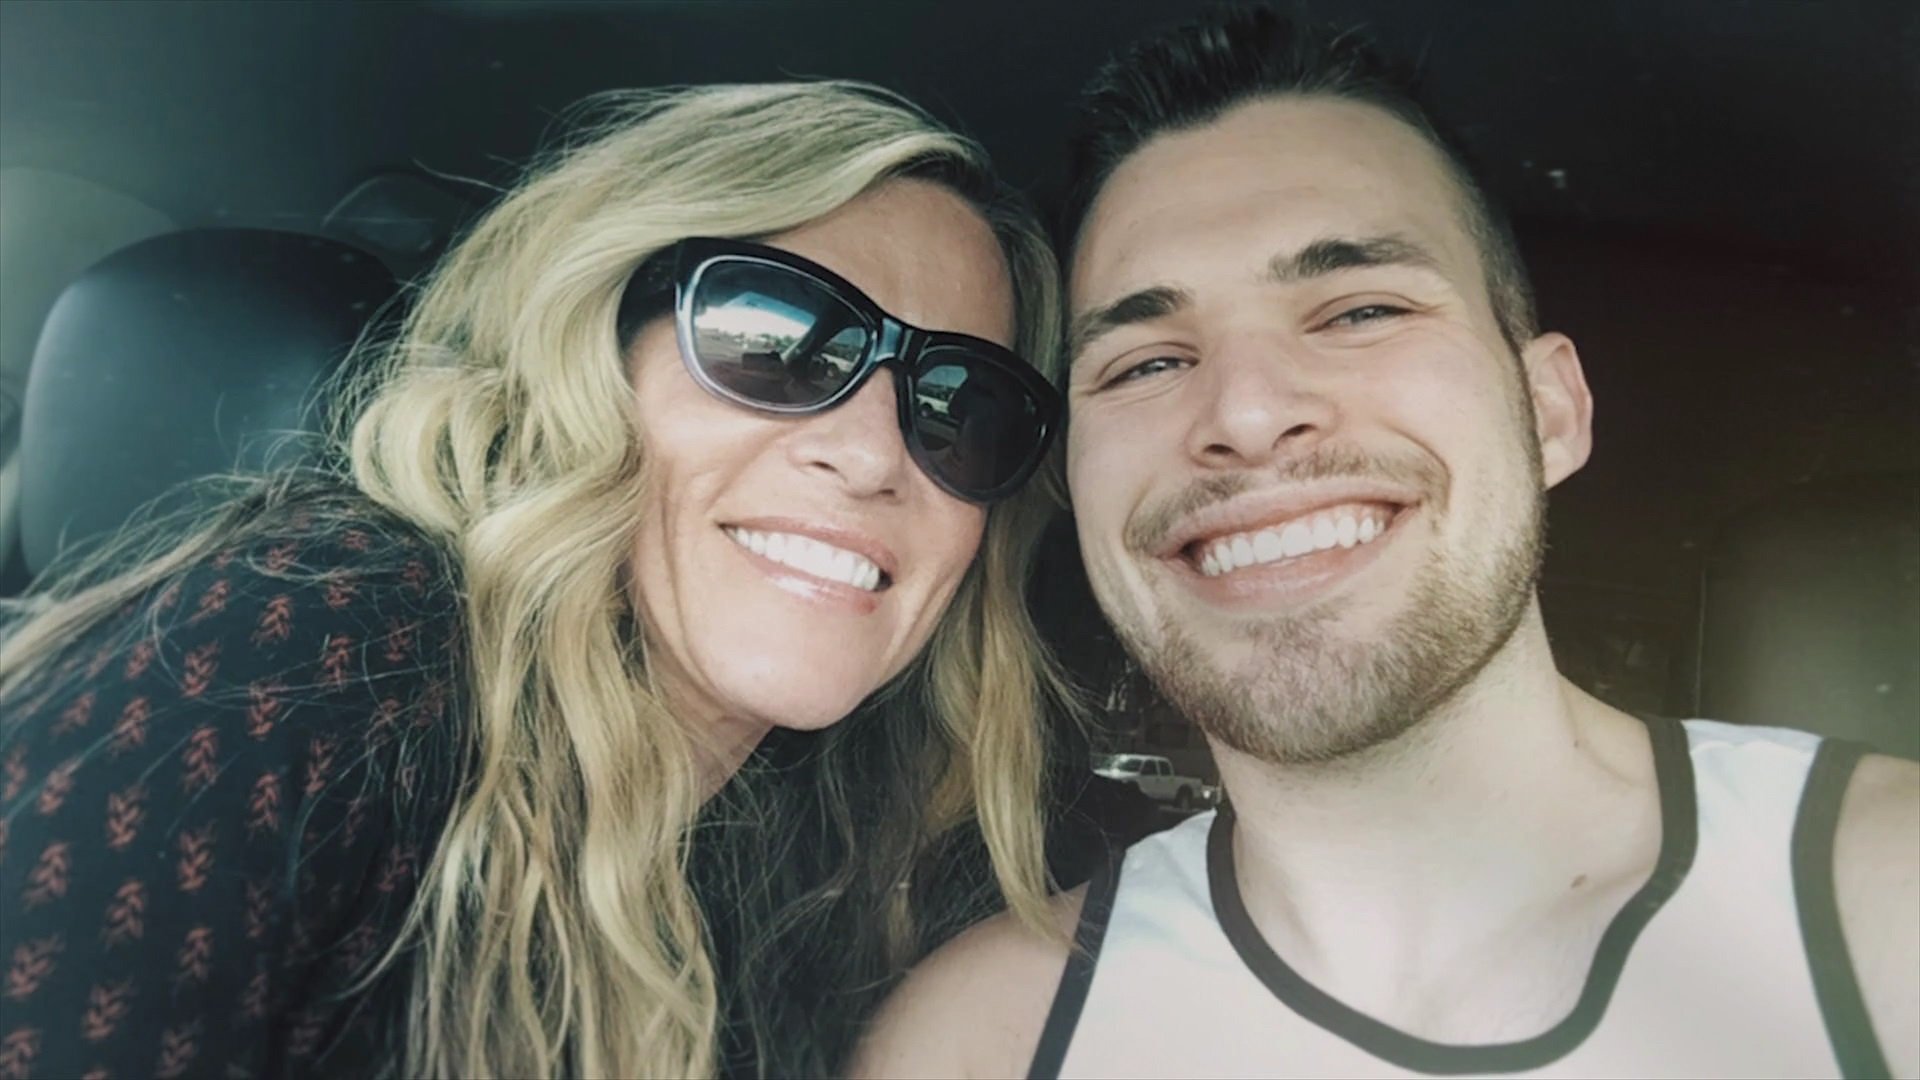 Lori Vallow and Cobly Ryan smile together for a selfie used in the documentary 